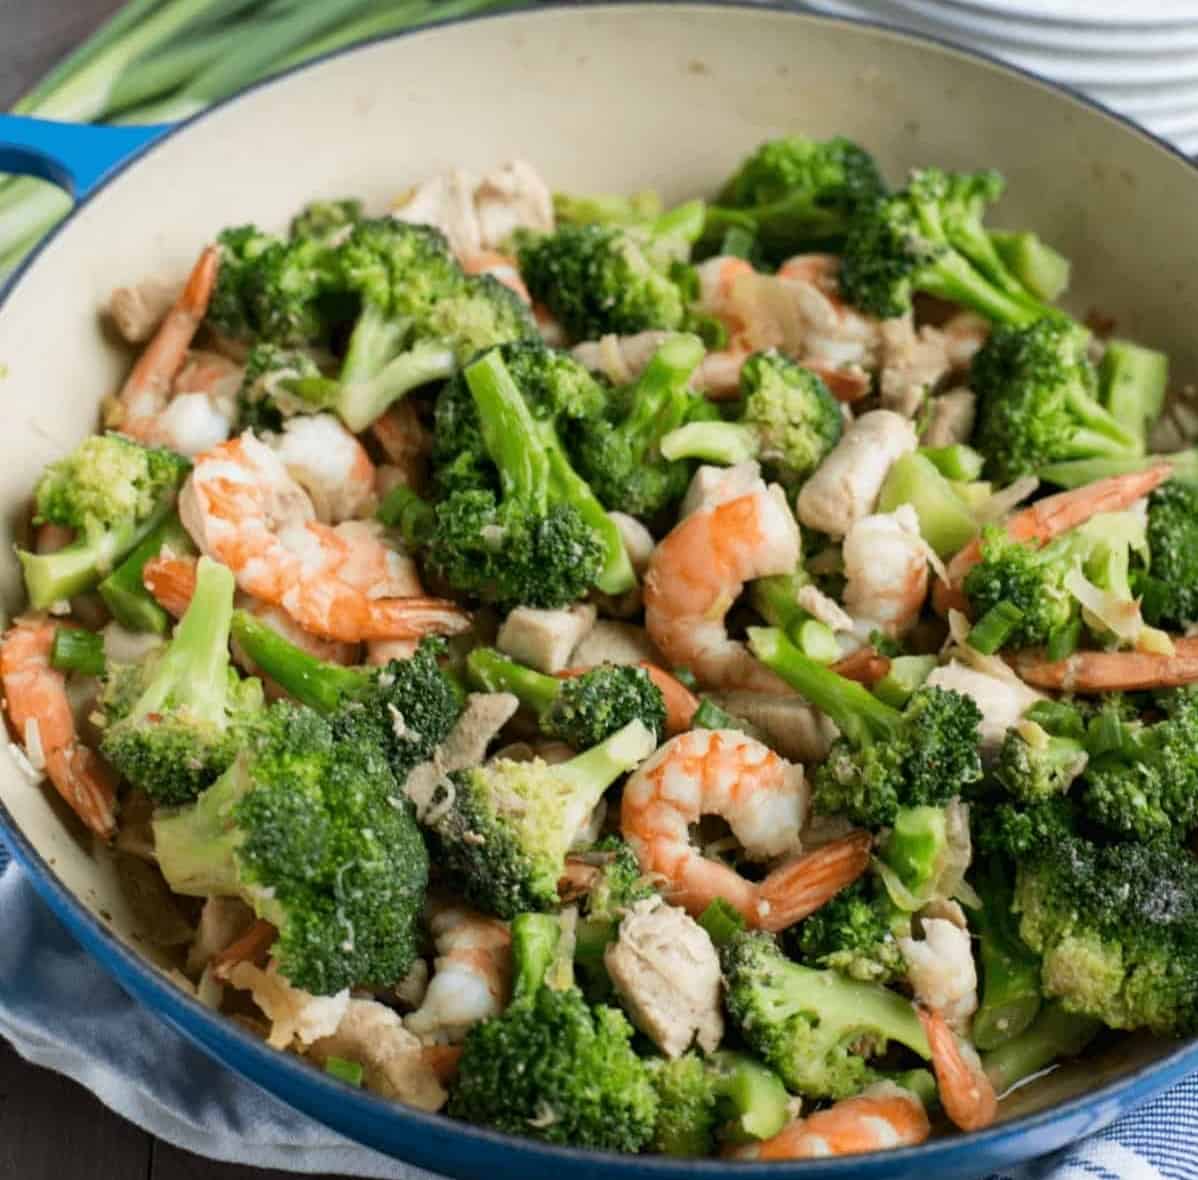 Chicken and shrimp stir fry with broccoli